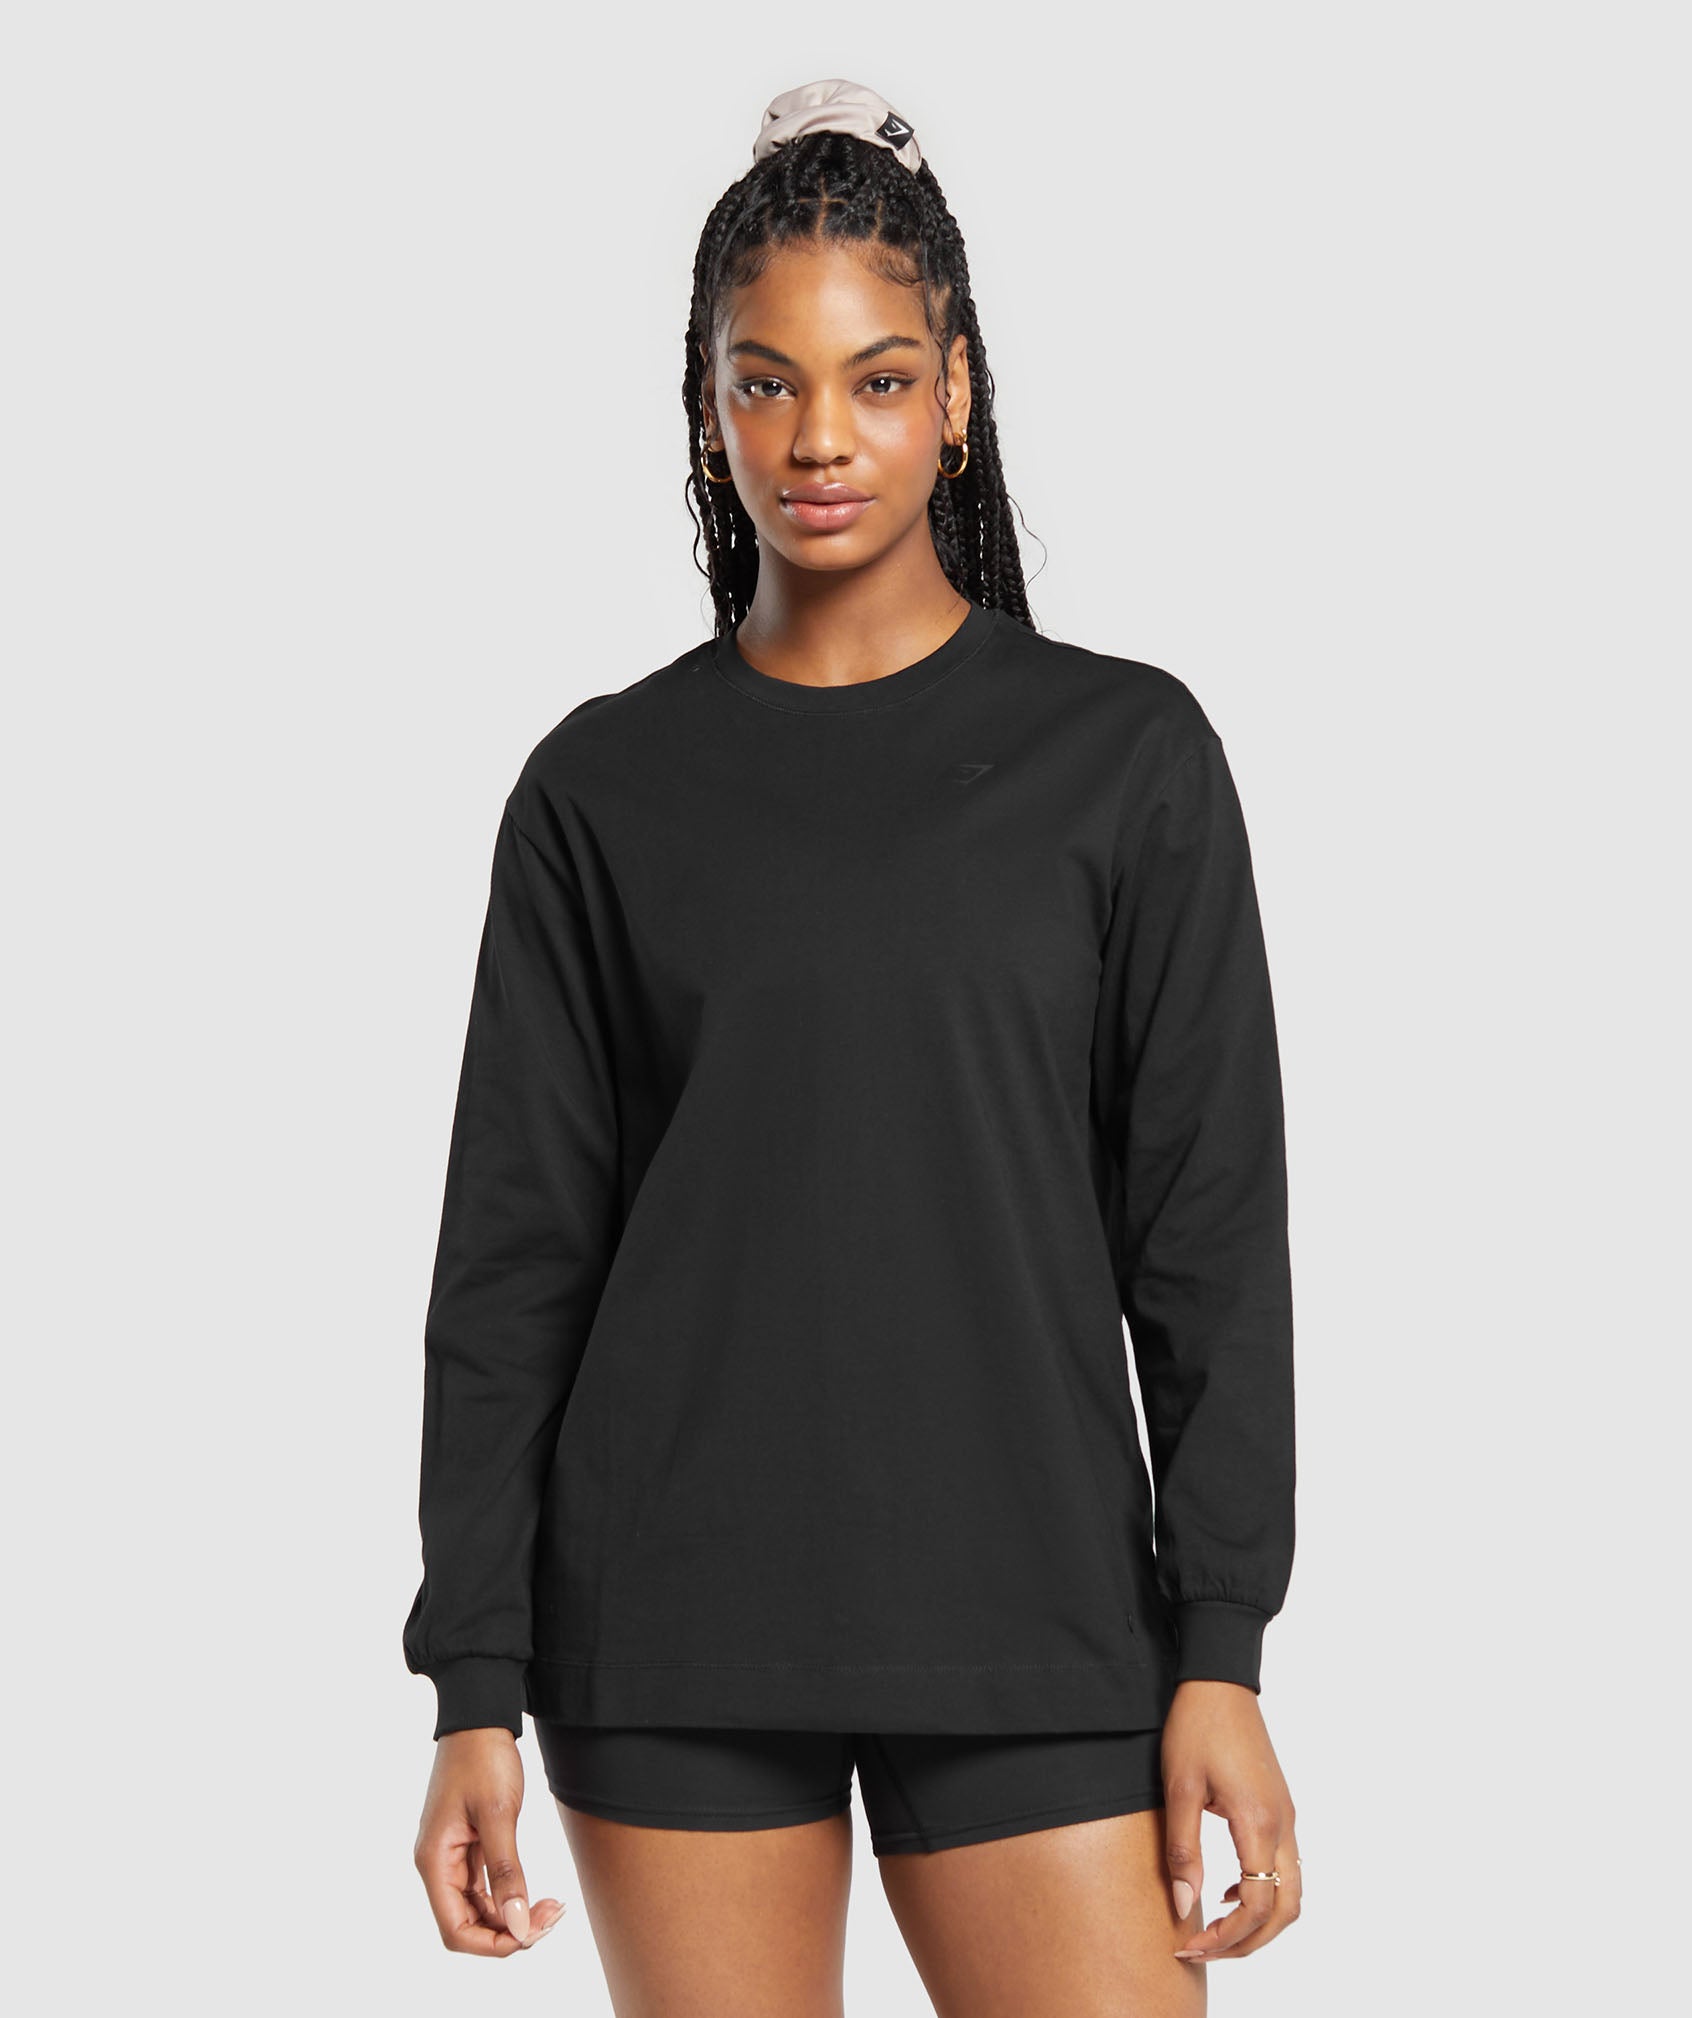 Cotton Oversized Long Sleeve Top in Black